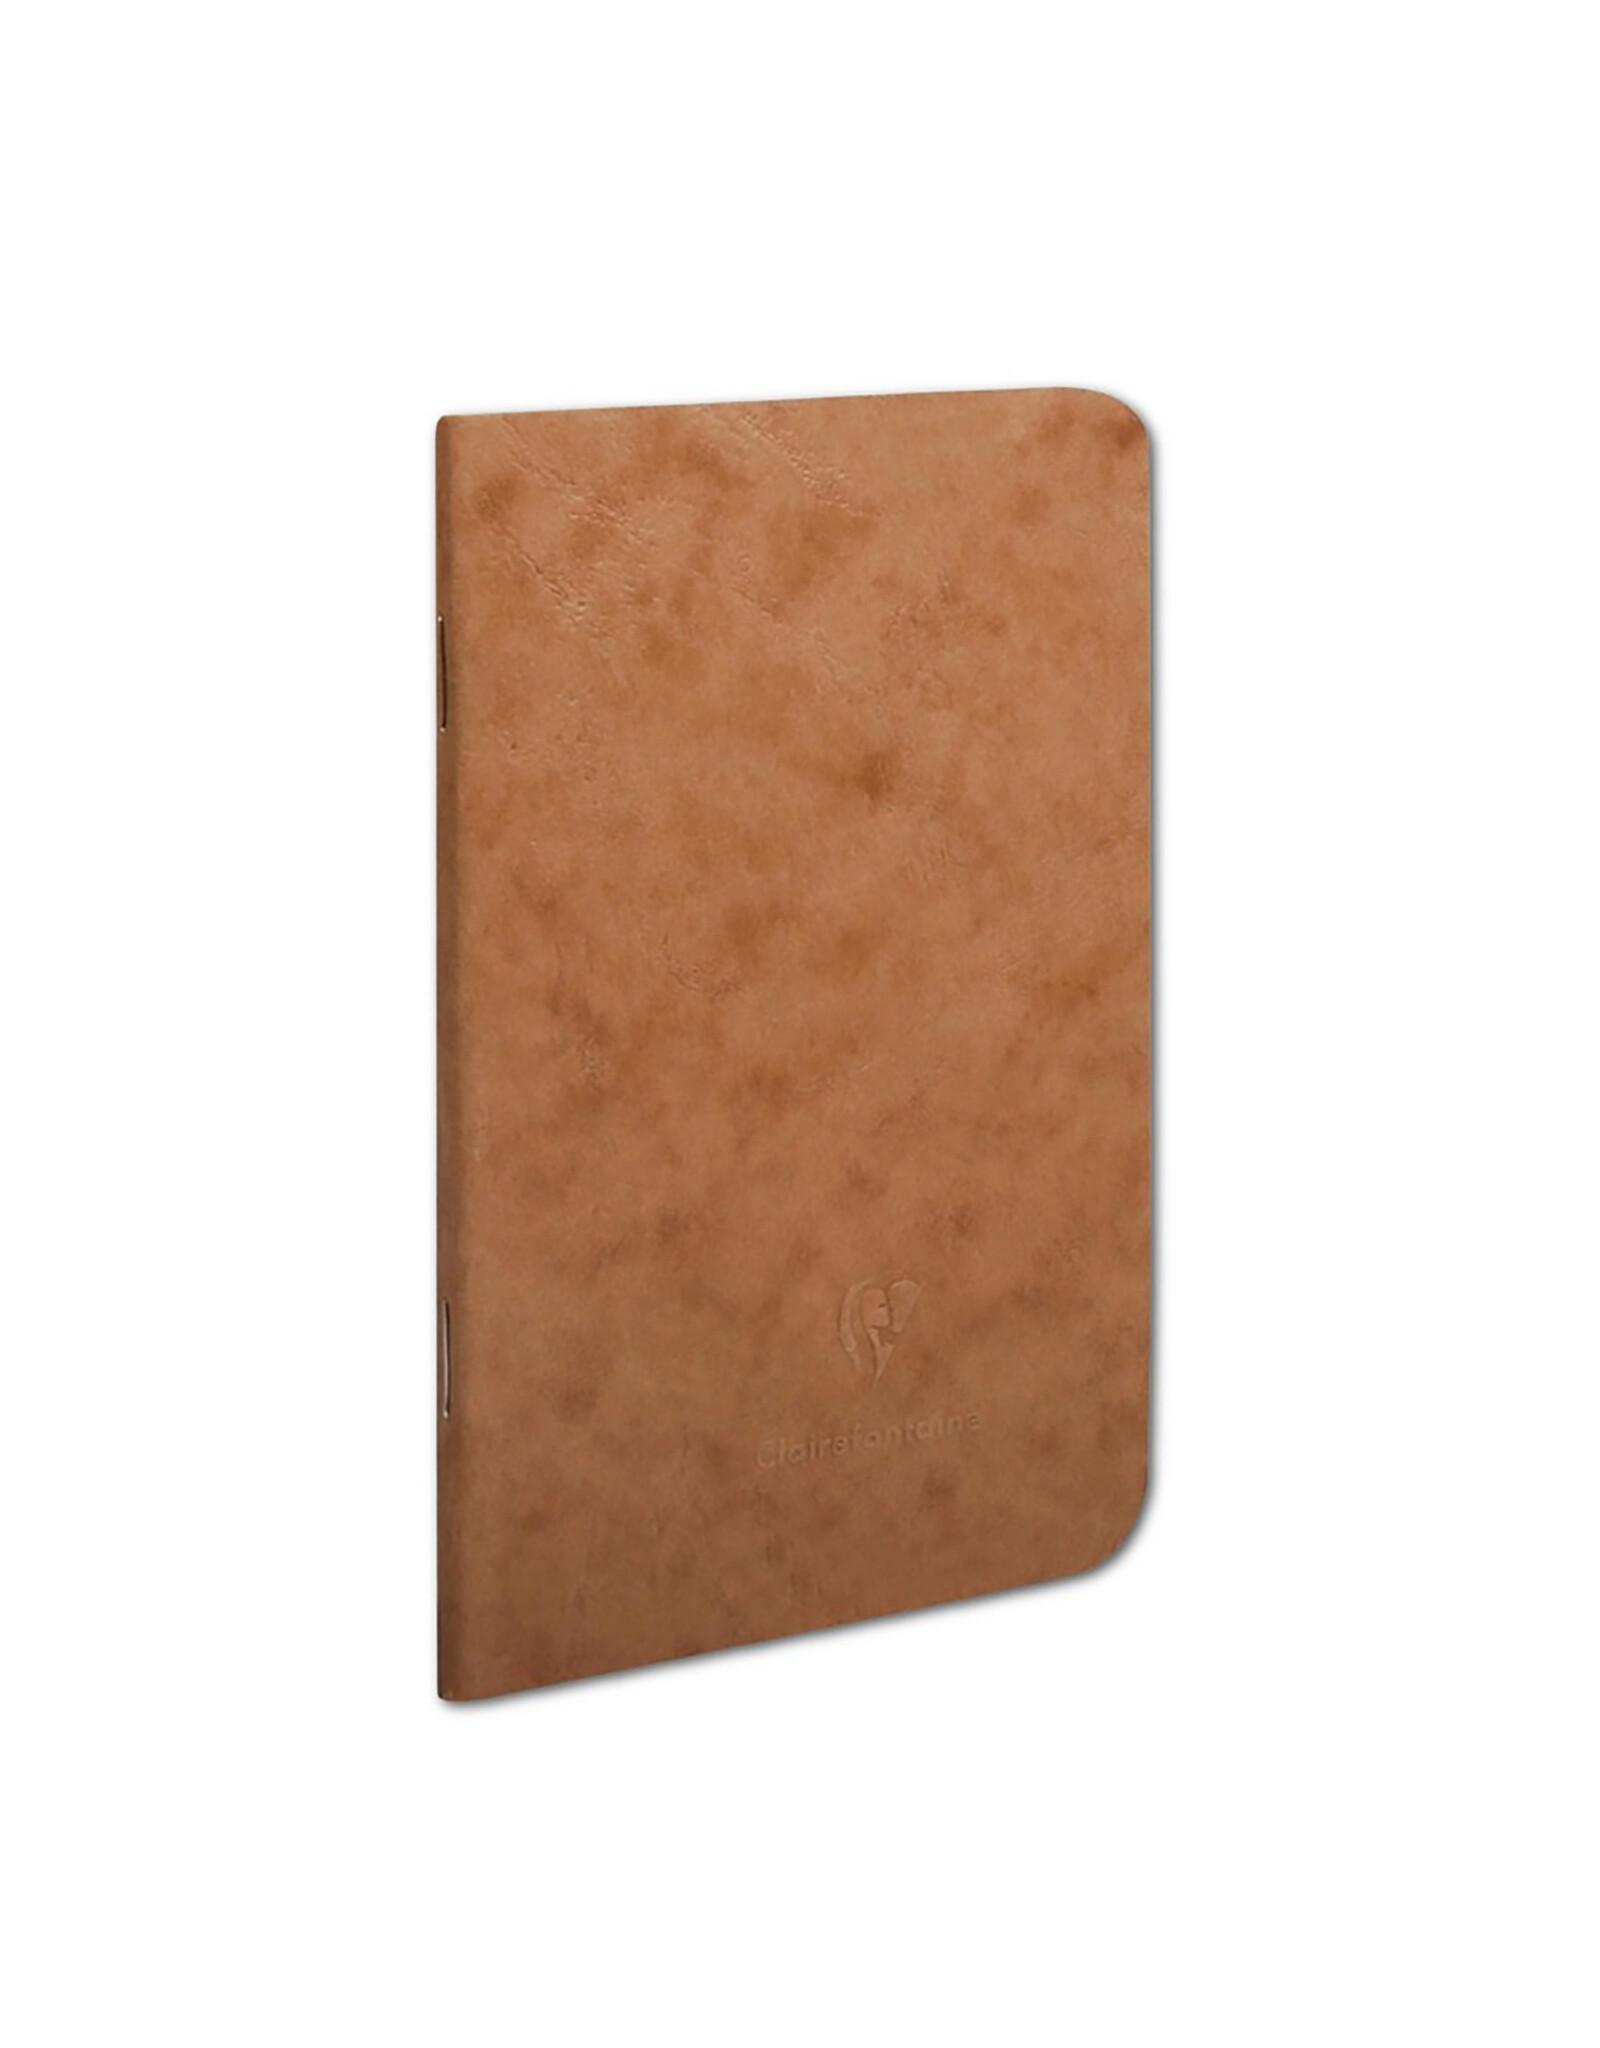 Clairefontaine Tan Life Unplugged Lined A5 Notebook